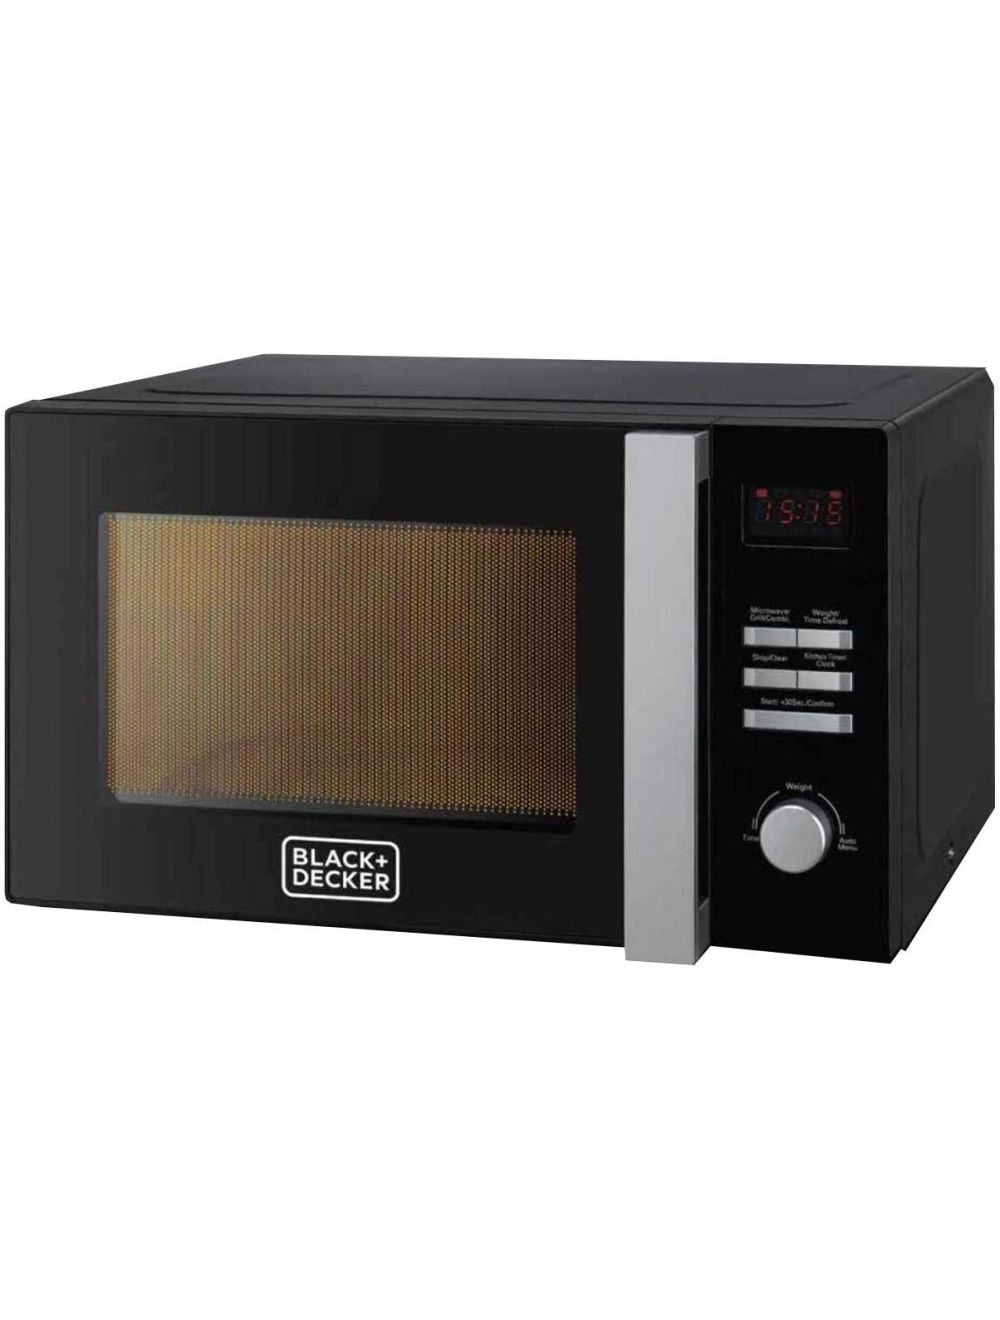 28 Ltr Microwave Oven with Grill-MZ2800PG-B5